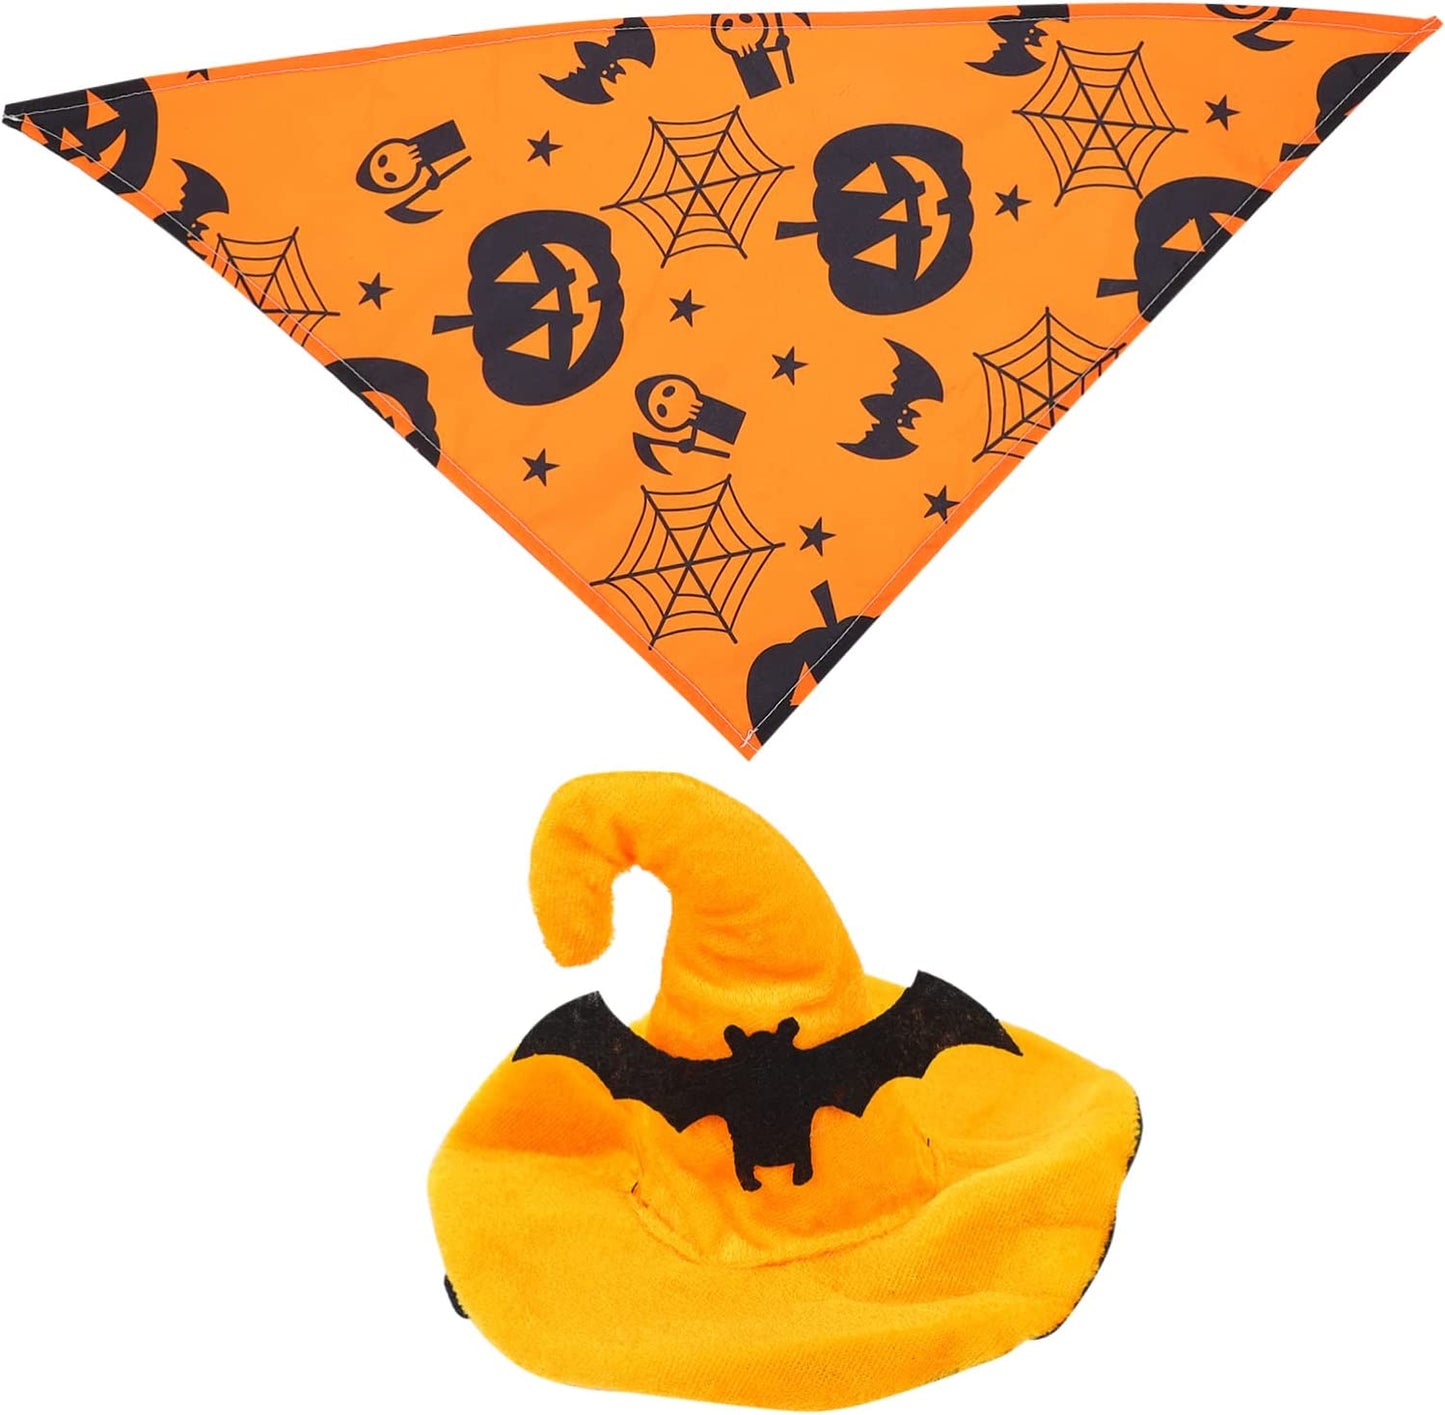 BCOATH 1 Set Large Medium Print Towel Adjustable Scarf Halloween Pet Decoration Scary Pets and Puppy Ornament Party Kit for Cats Witch Cat Bib Bandana Funny Triangle with Hat Dog Pumpkin Animals & Pet Supplies > Pet Supplies > Dog Supplies > Dog Apparel BCOATH Orange 62X42X42CM 